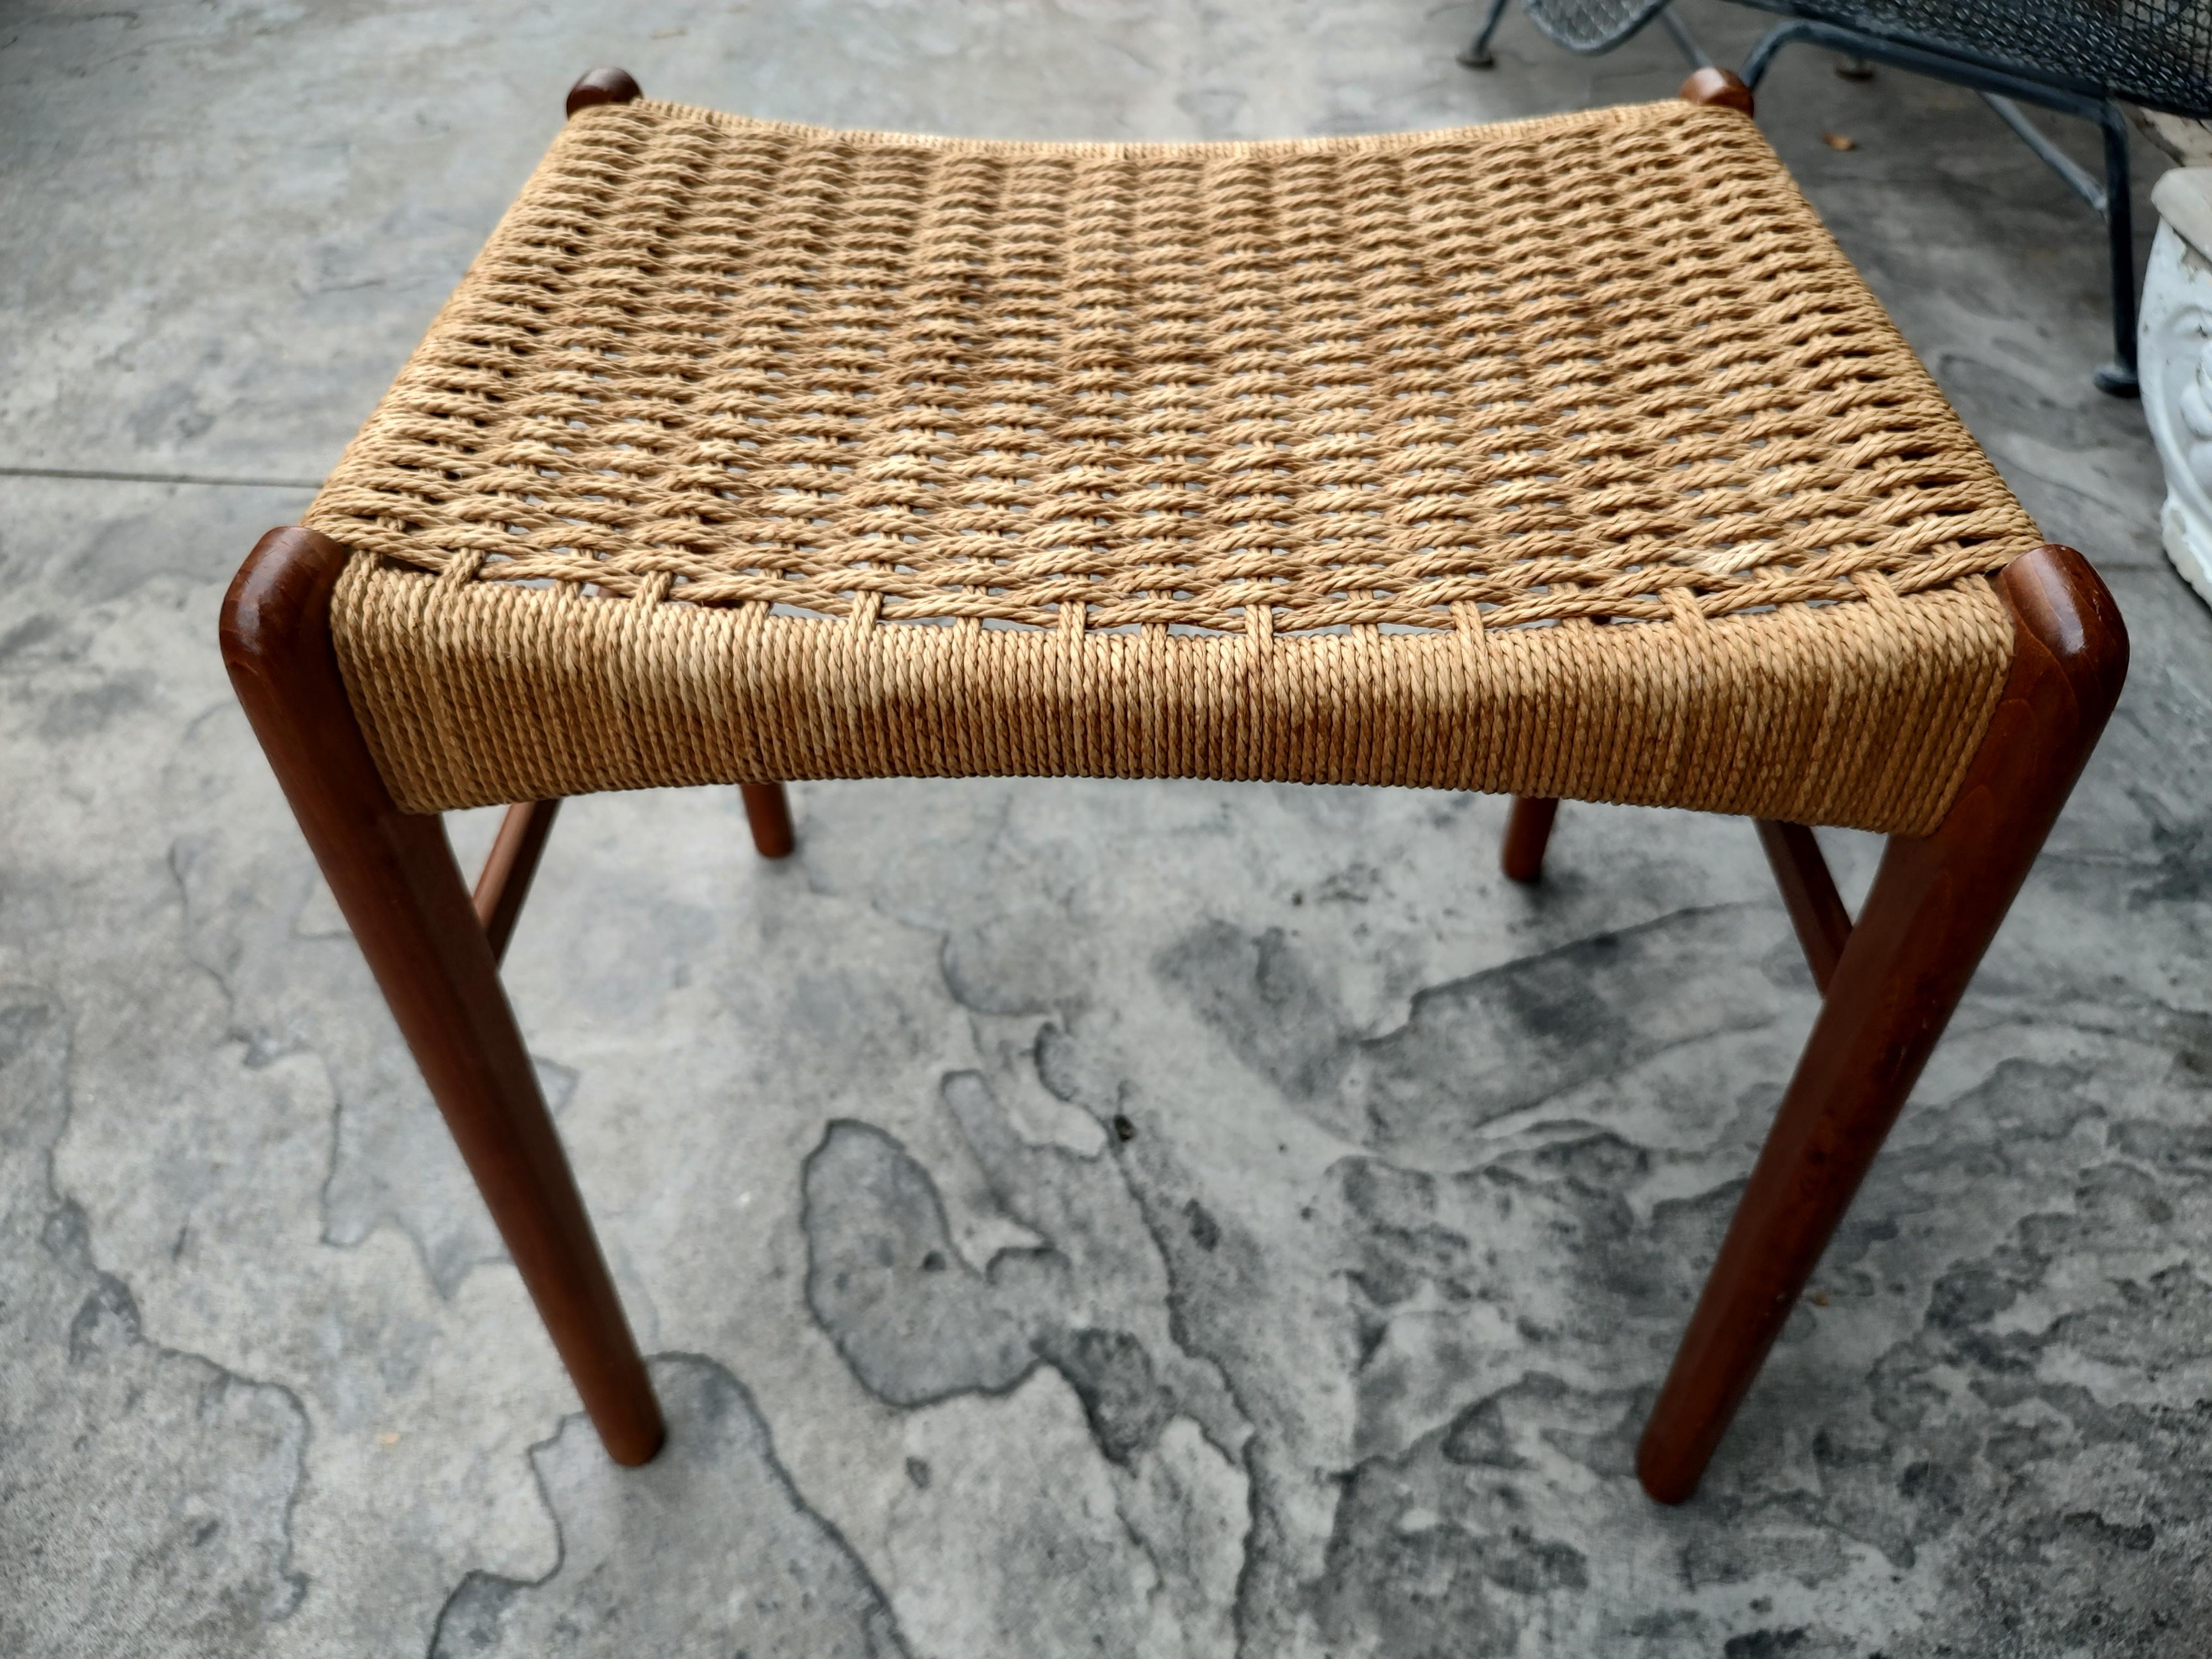 Papercord Mid-Century Modern Danish Footstool with Woven Paper Cord Seat, 1960 For Sale